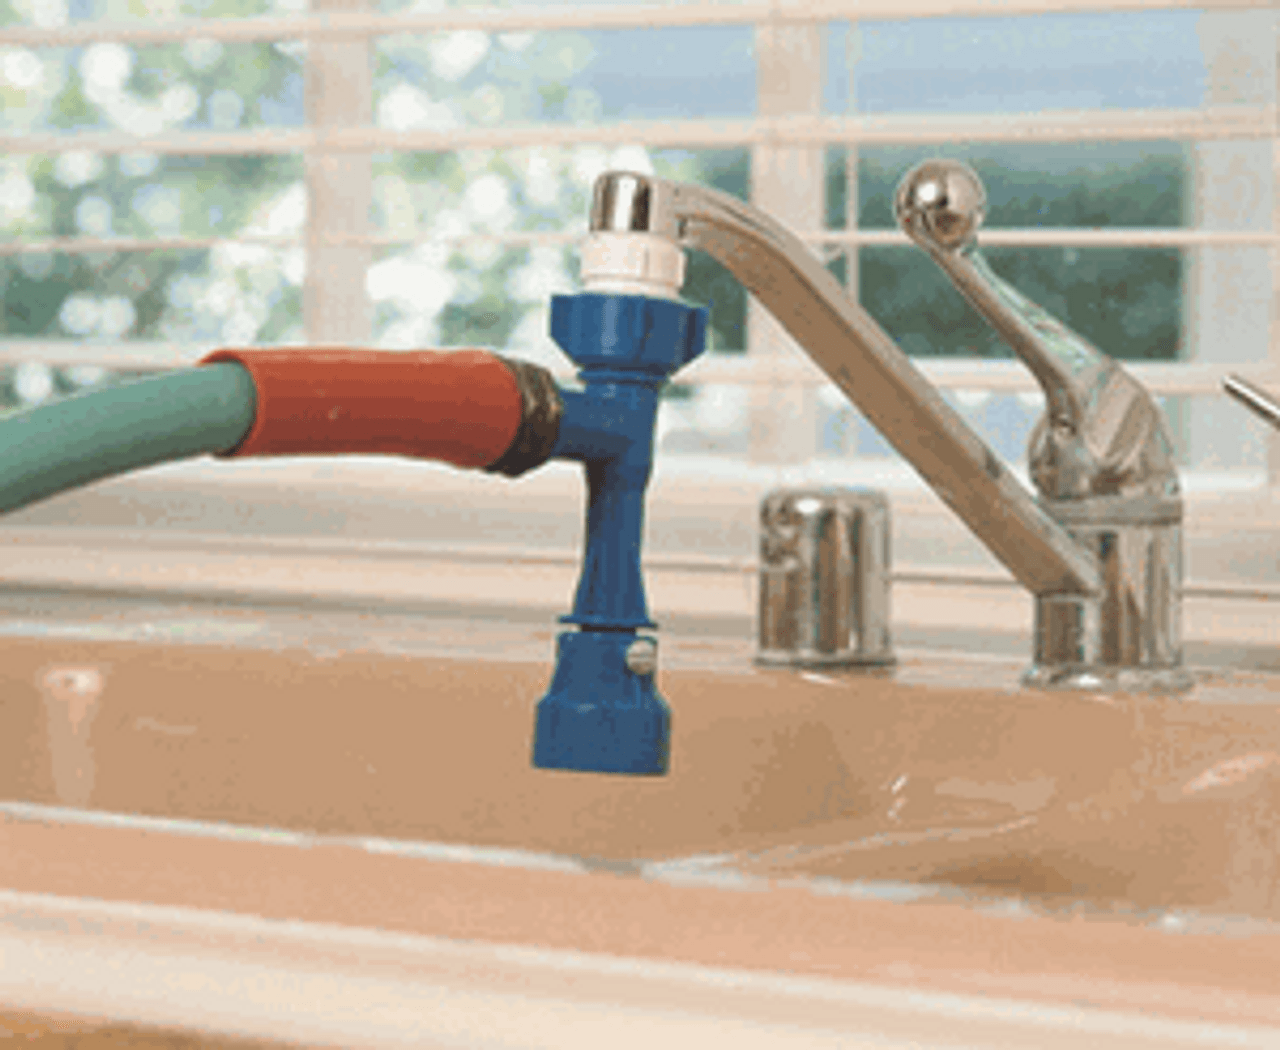 can aipstyle garden hose be hooked to kitchen sink